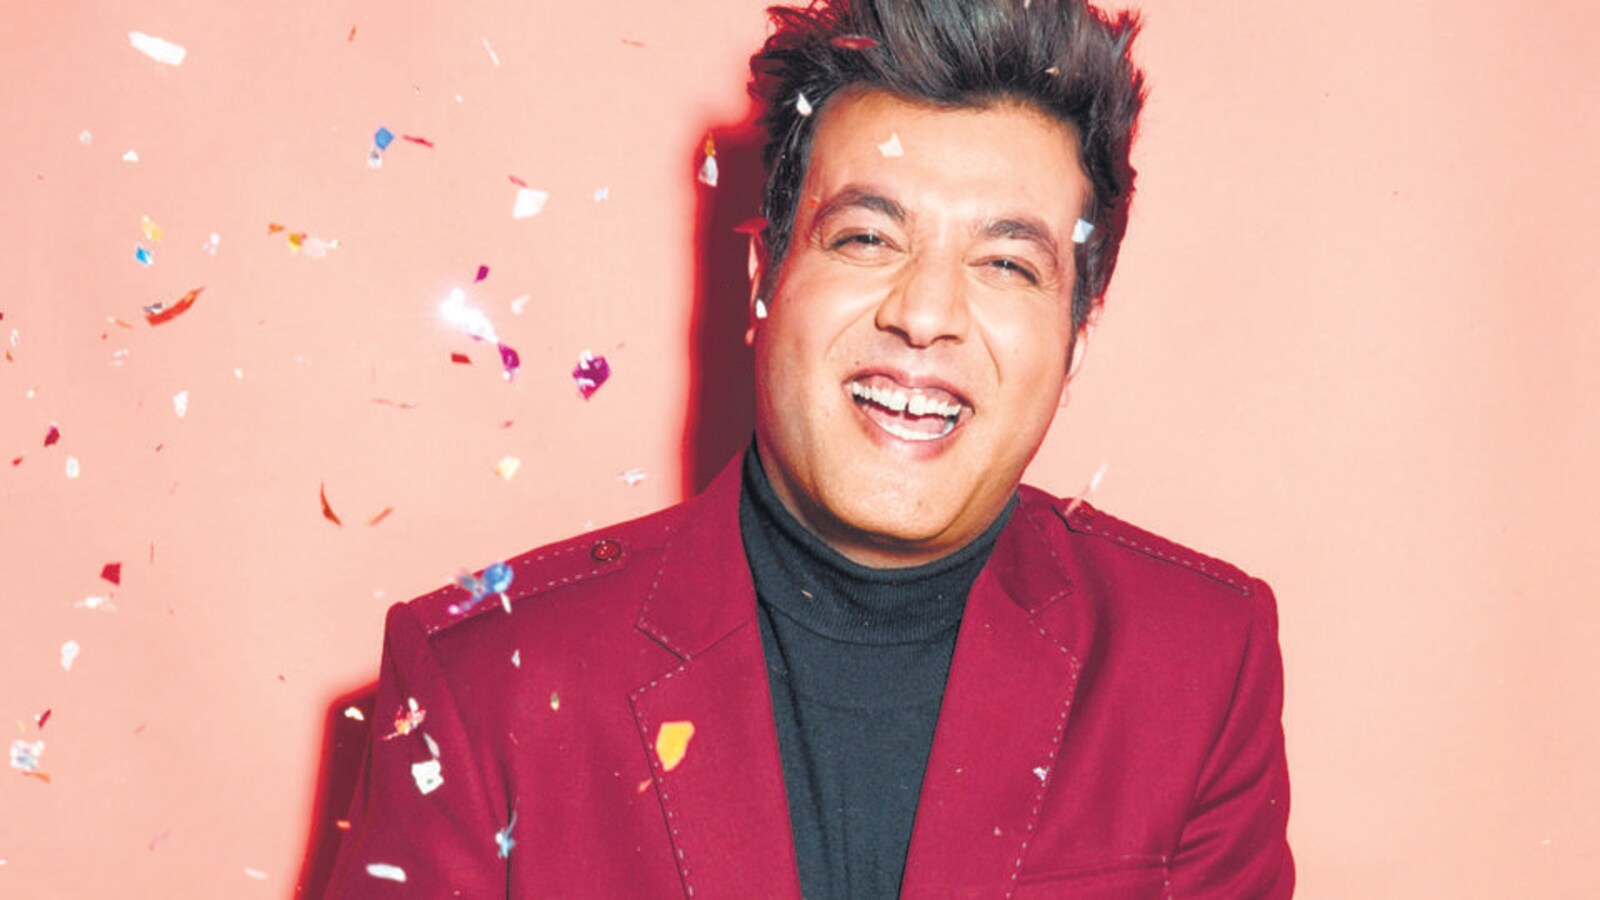 Varun Sharma: People smile when they look at me, so I think that's the biggest goal tick off